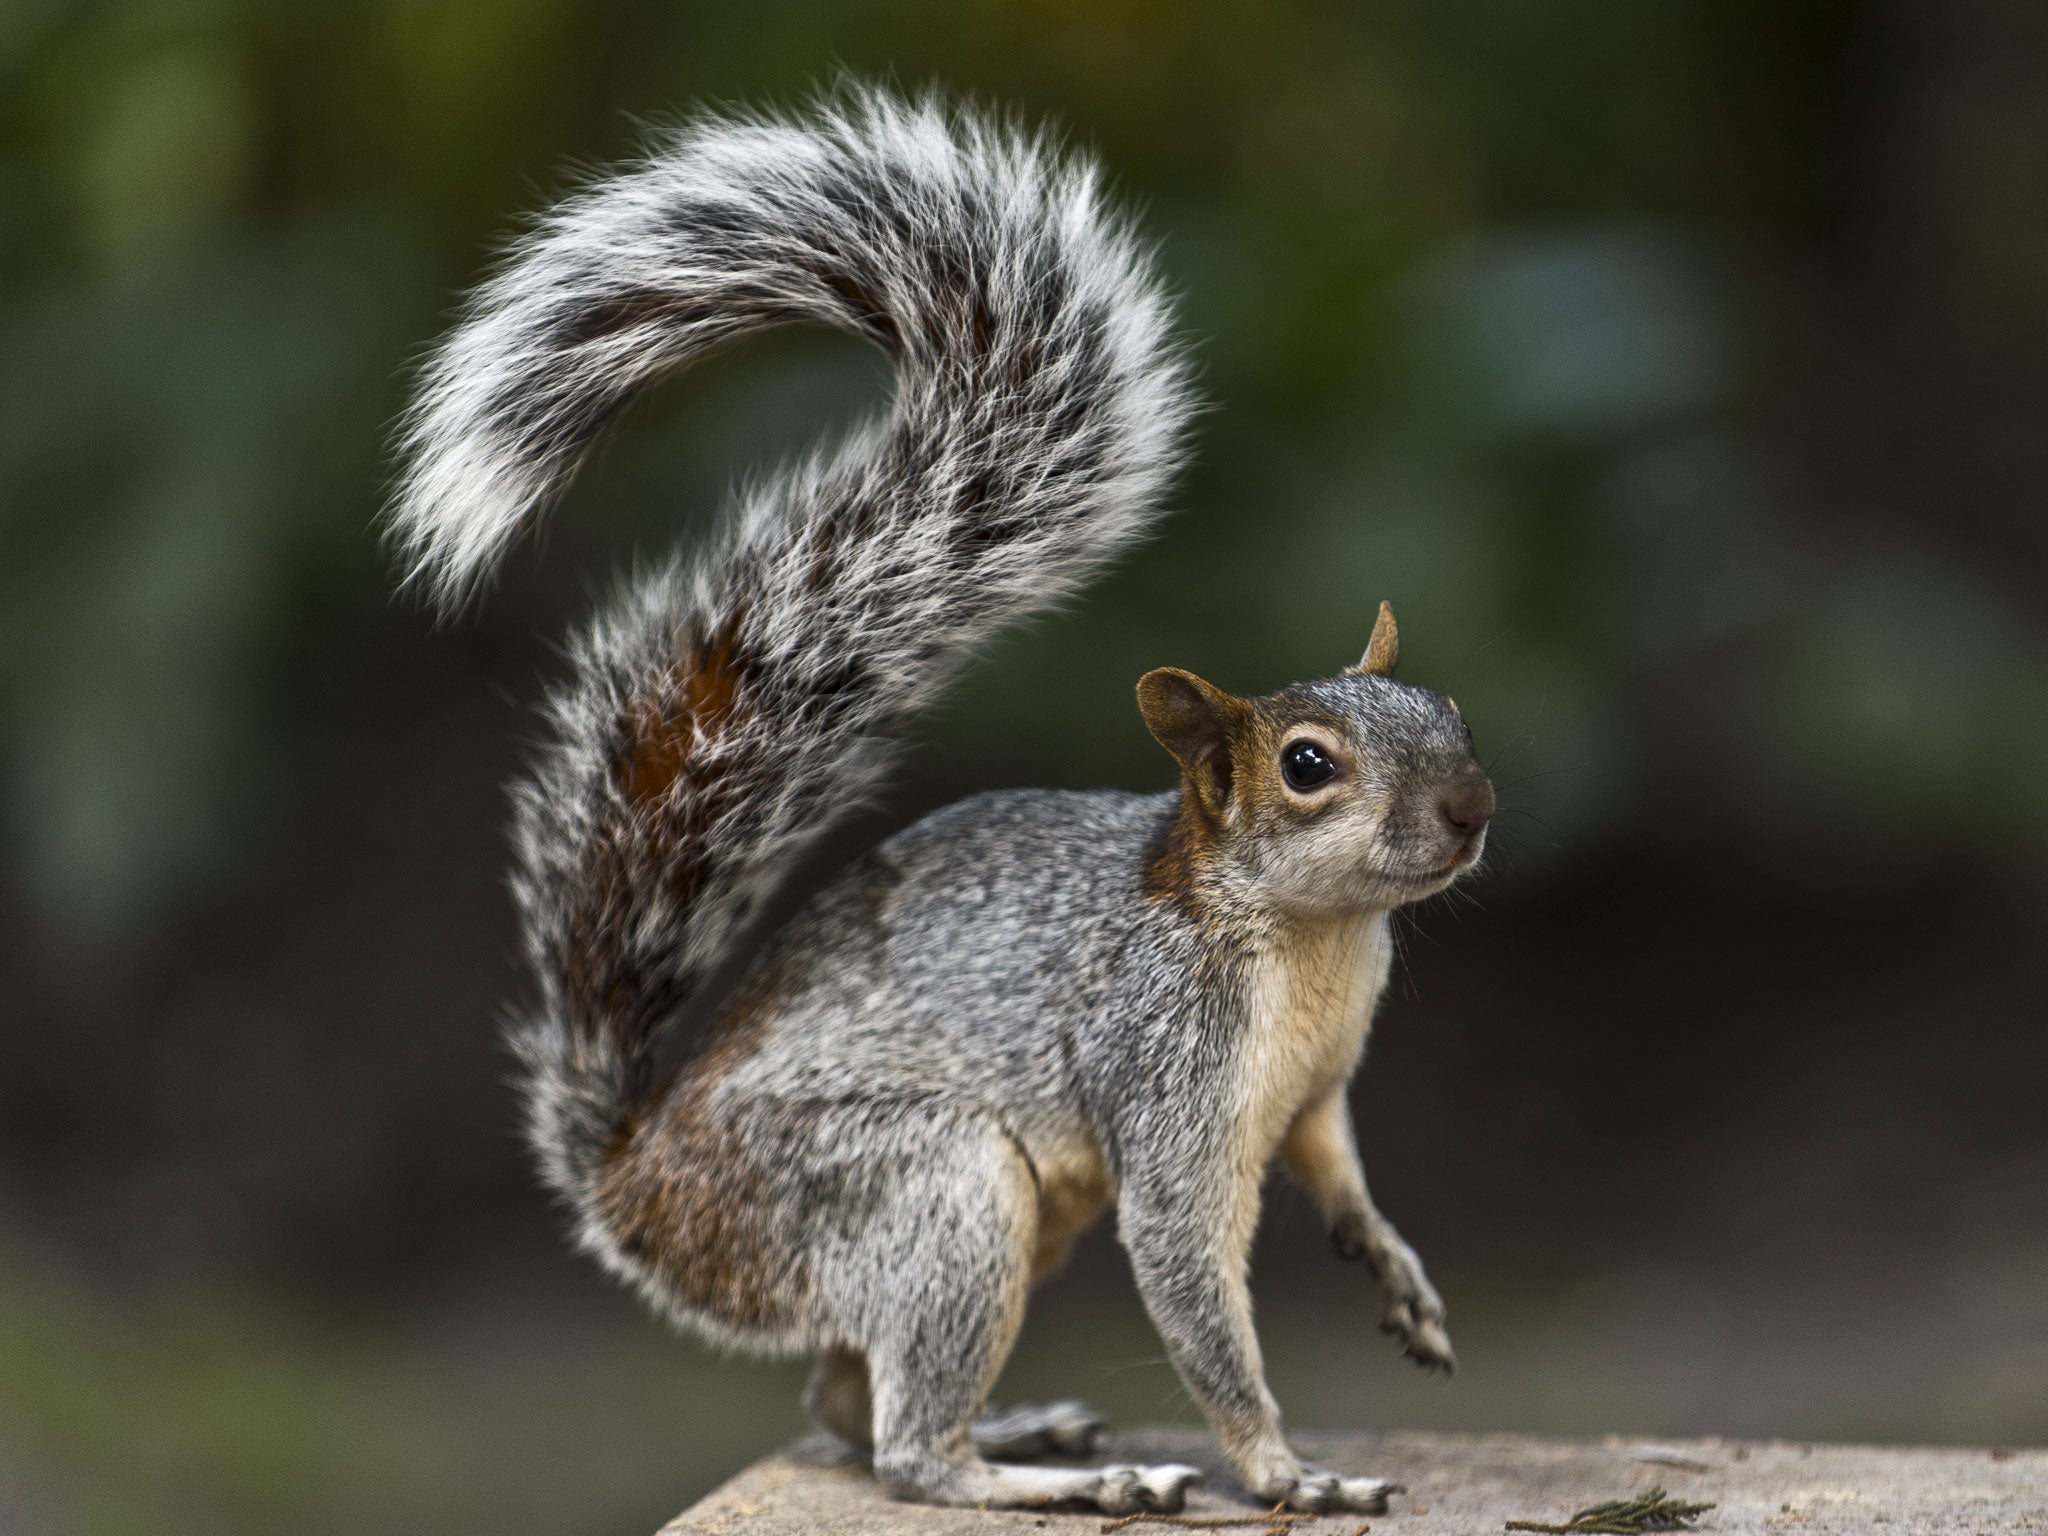 A decapitated squirrel is among the animals which have been found at a park in west London